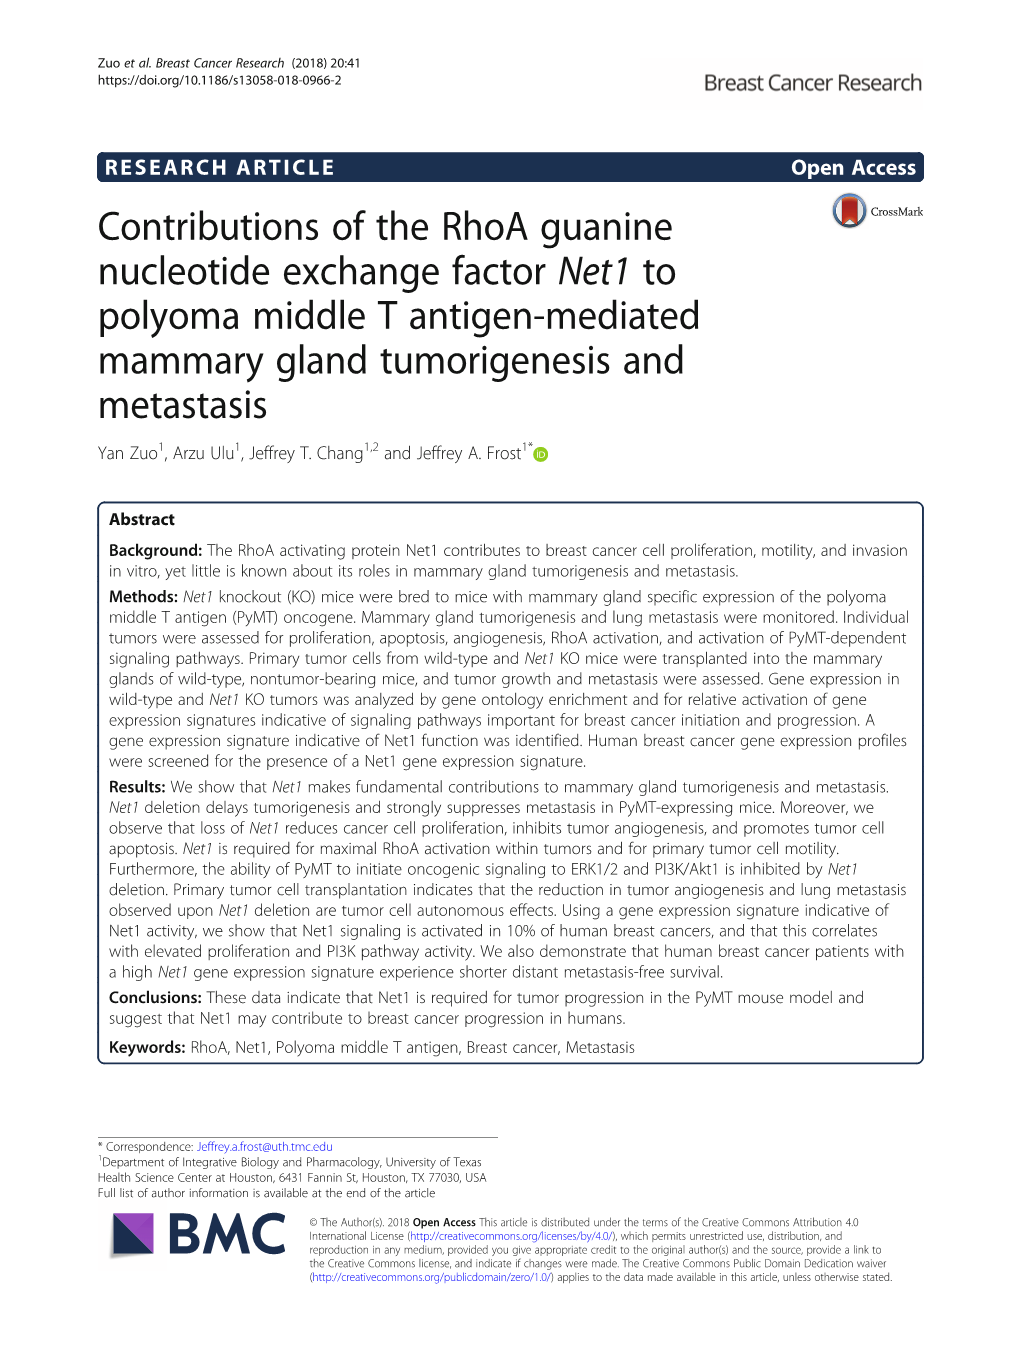 Contributions of the Rhoa Guanine Nucleotide Exchange Factor Net1